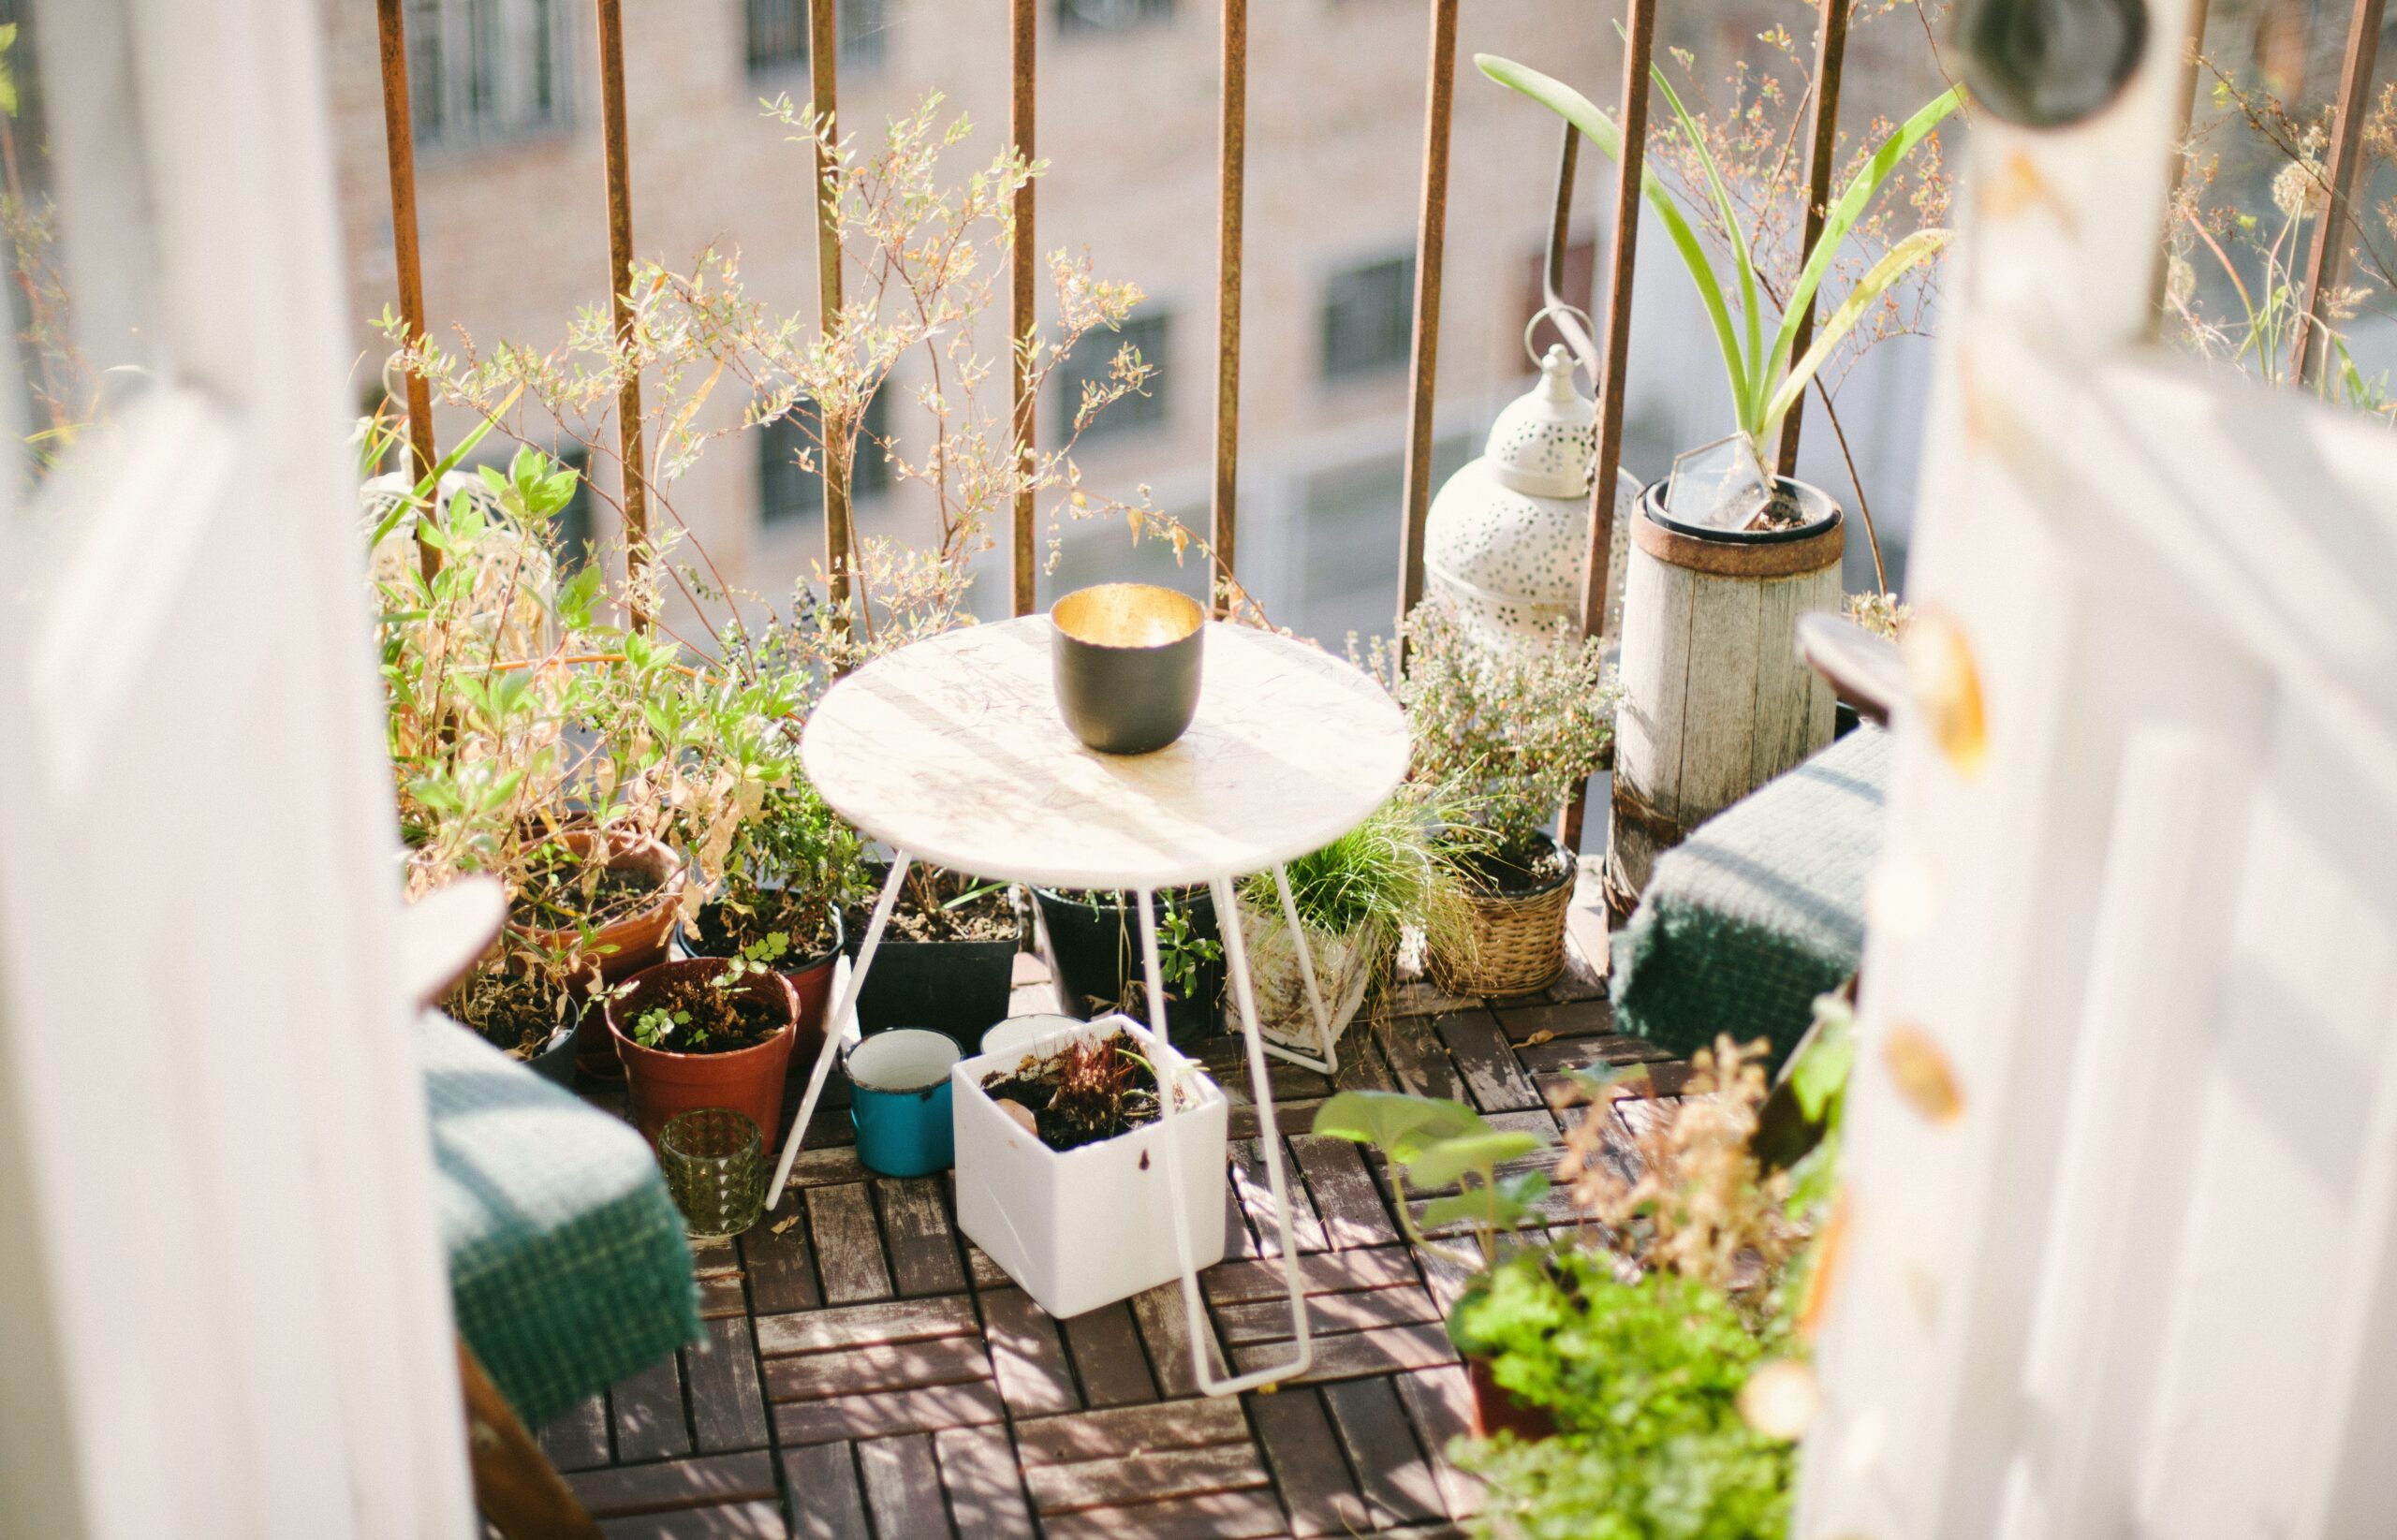 Balcony with plants in pots and a little table